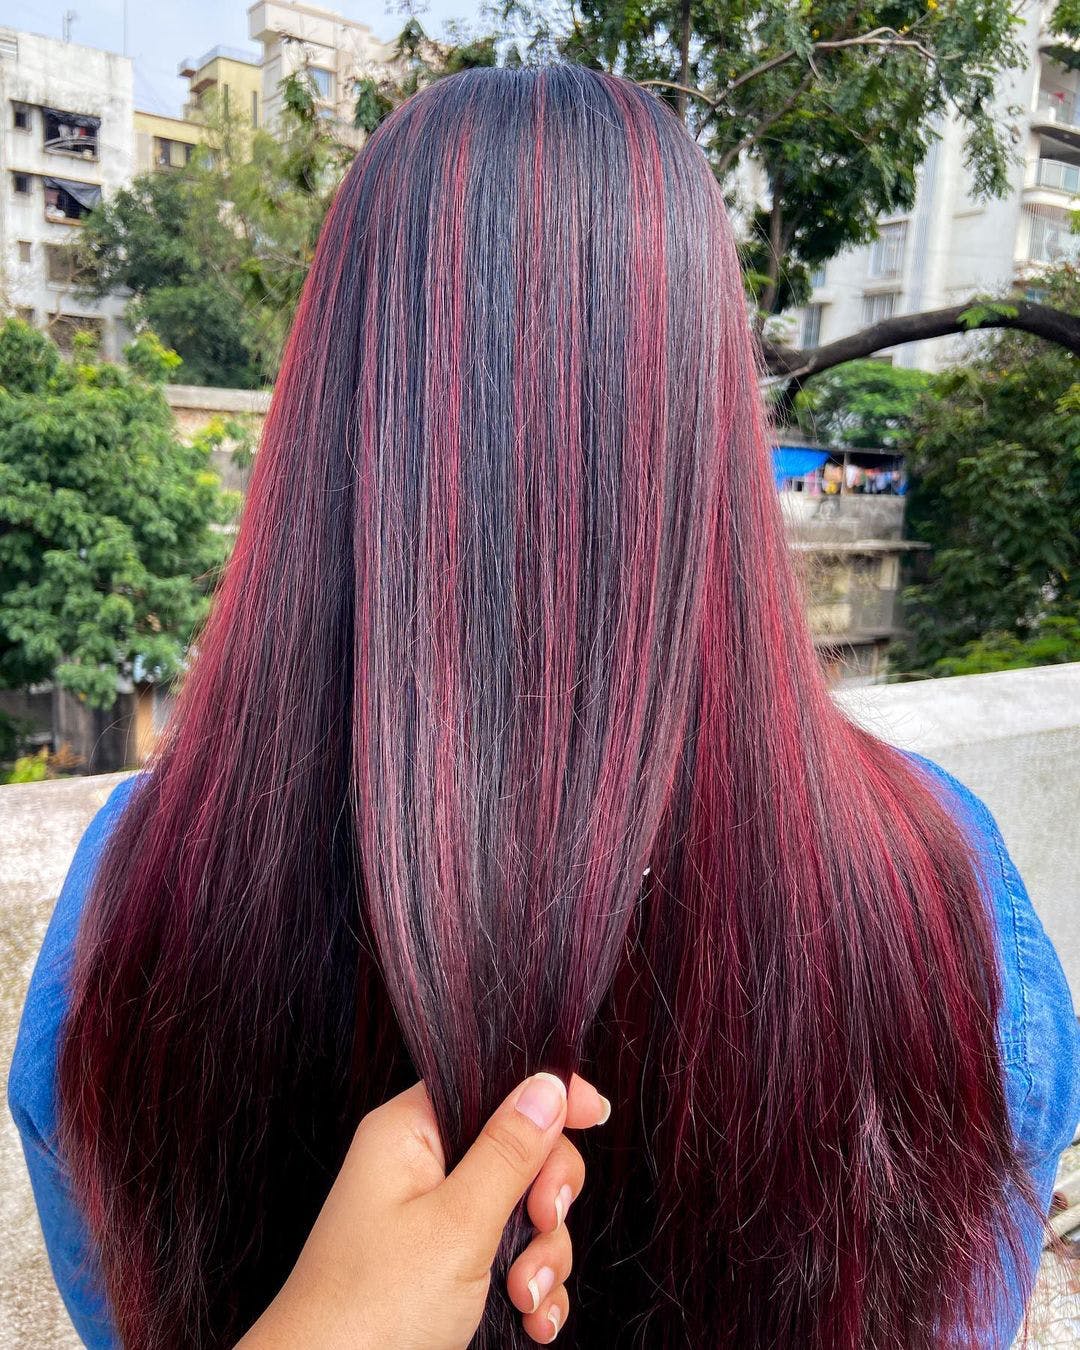 Get Your Hair Colored At Hair Castle I LBB Mumbai